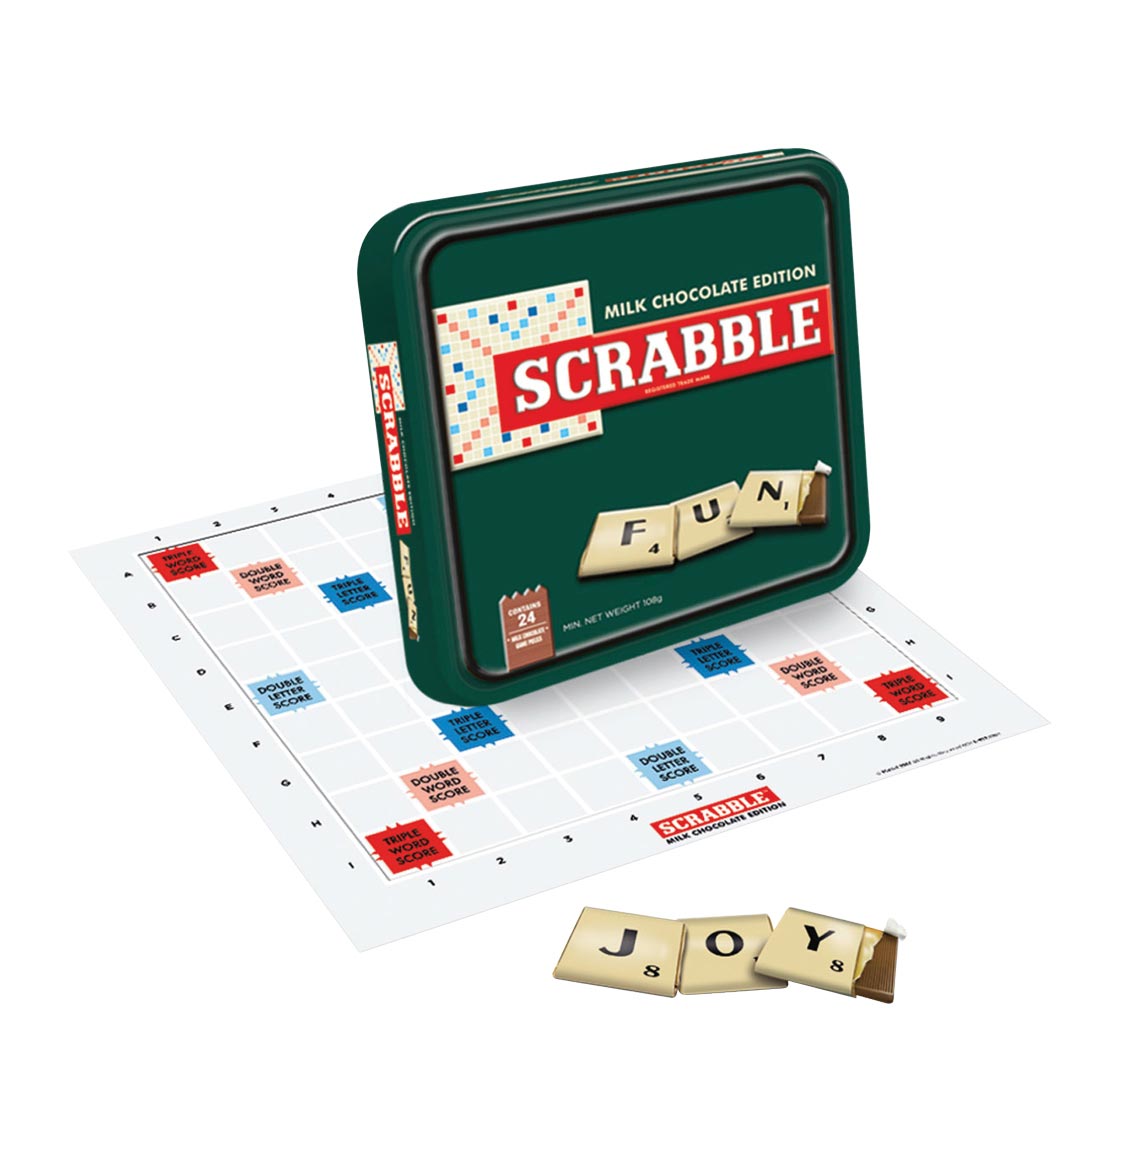 Scrabble Belgian Milk Chocolate Game In Luxury Tin Can Edition 108g